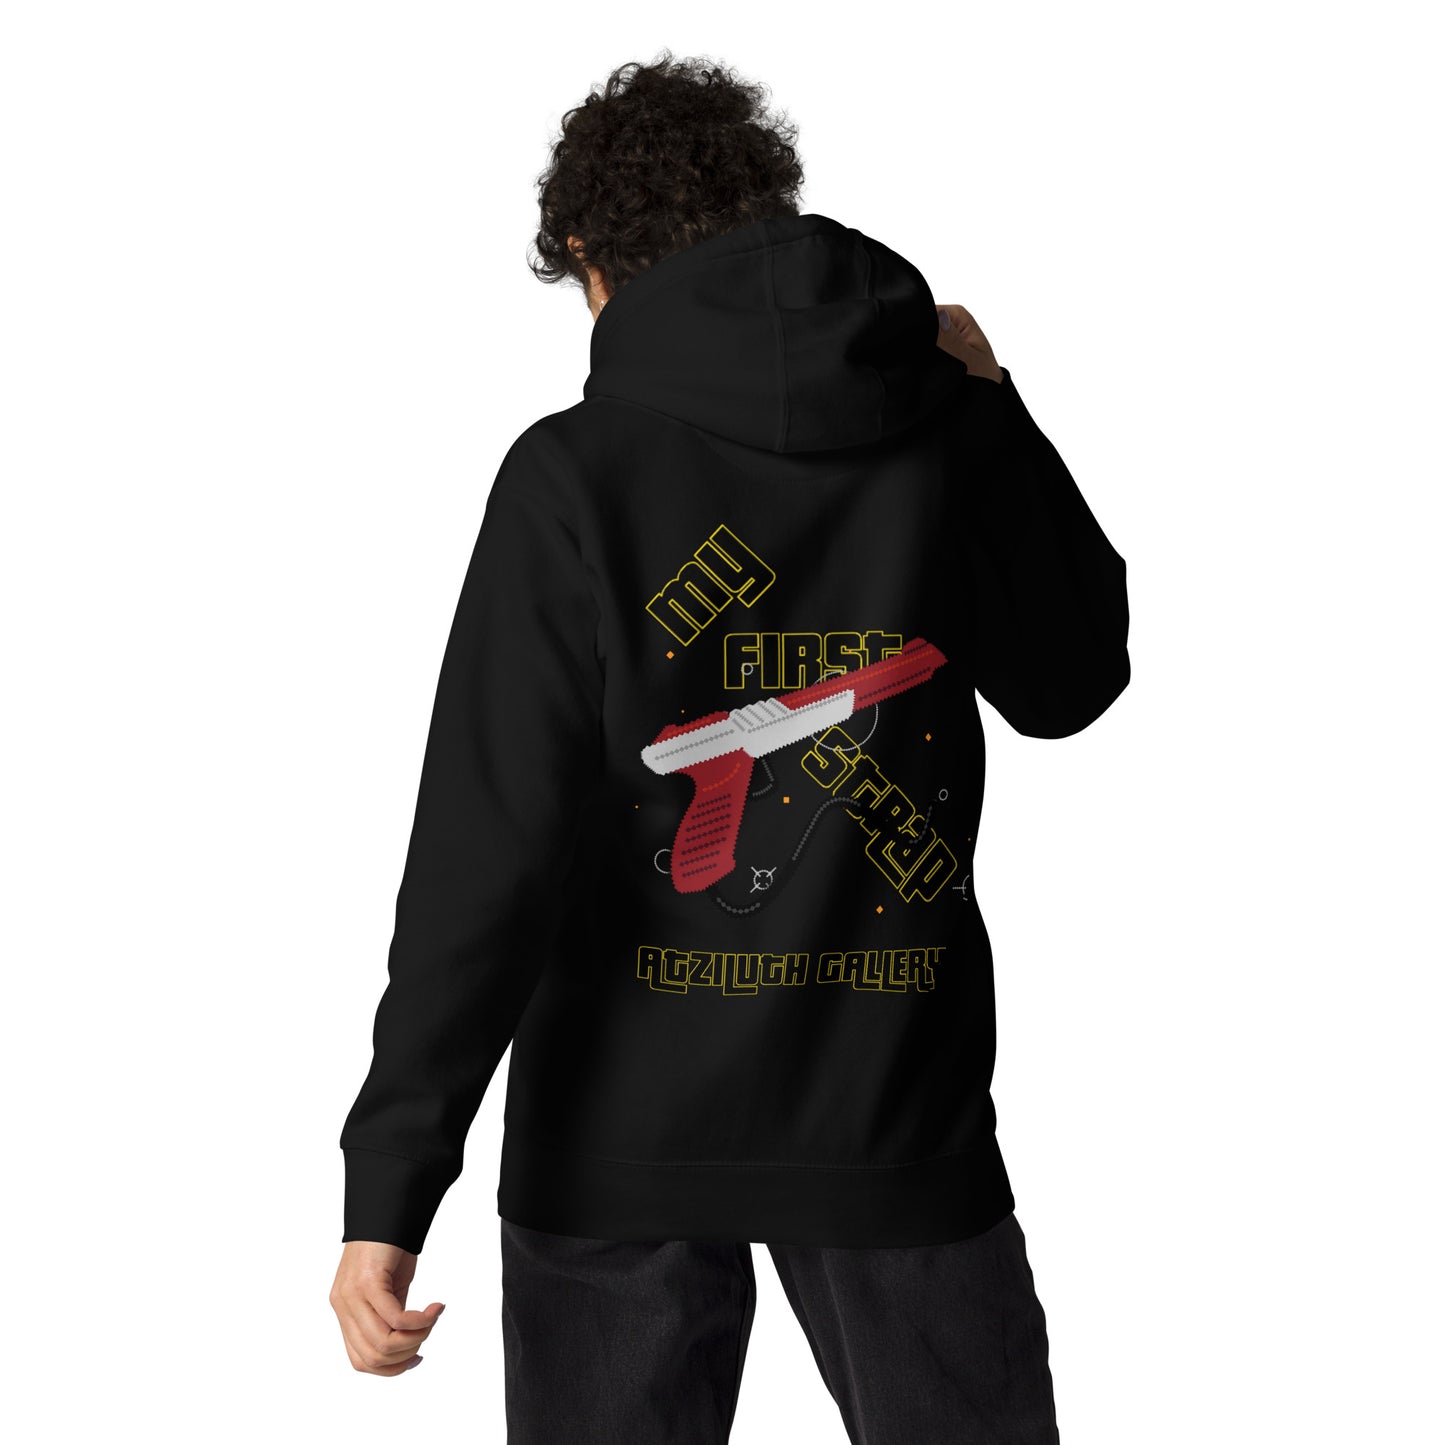 Atziluth Gallery "My 1st Strap" Hoodie